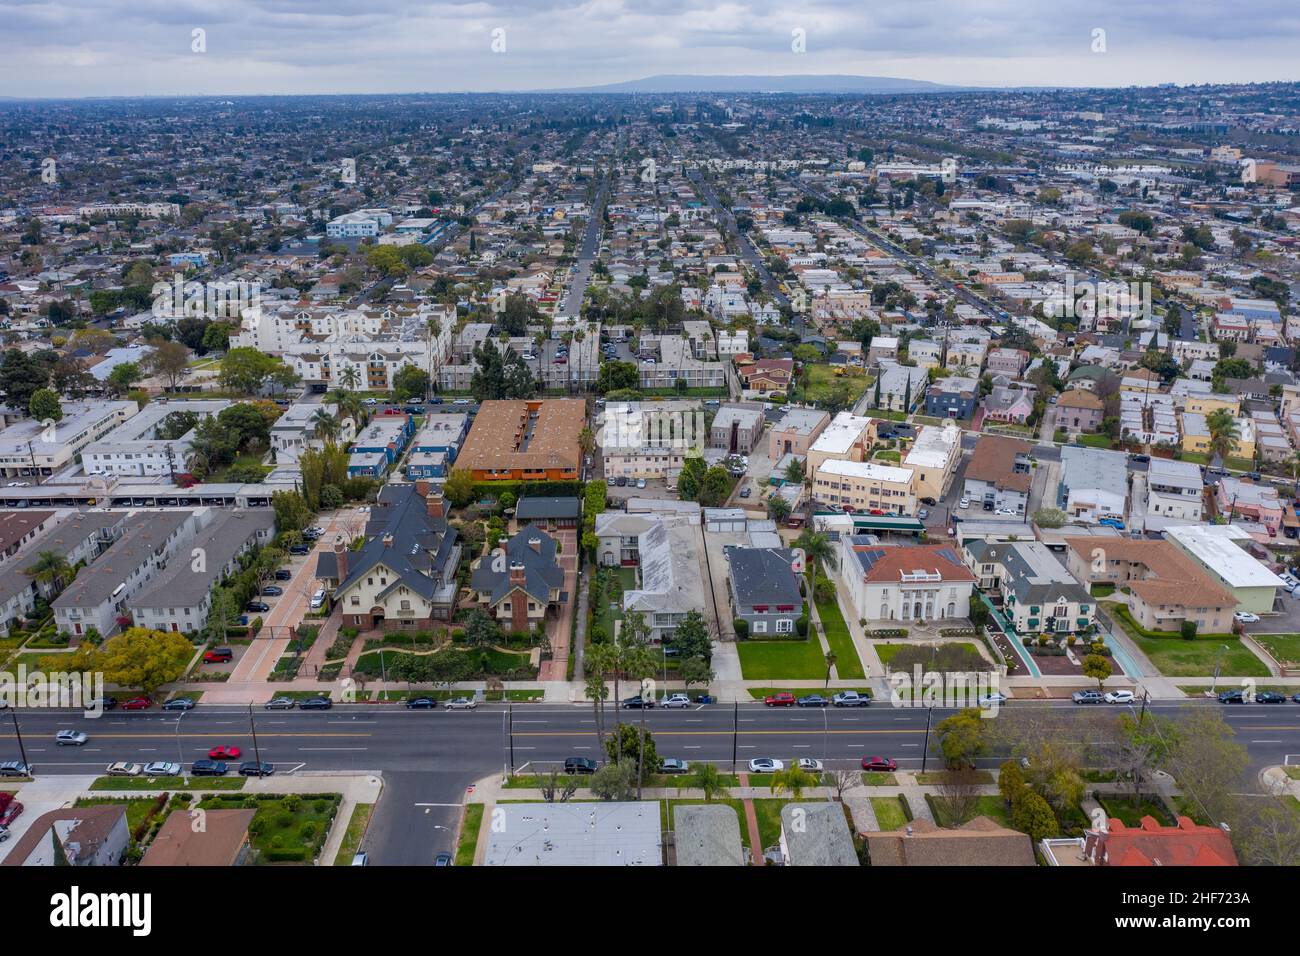 Looking south into Crenshaw Los Angeles on a cloudy day - South Los Angeles, Los Angeles, California, United States (US) Stock Photo